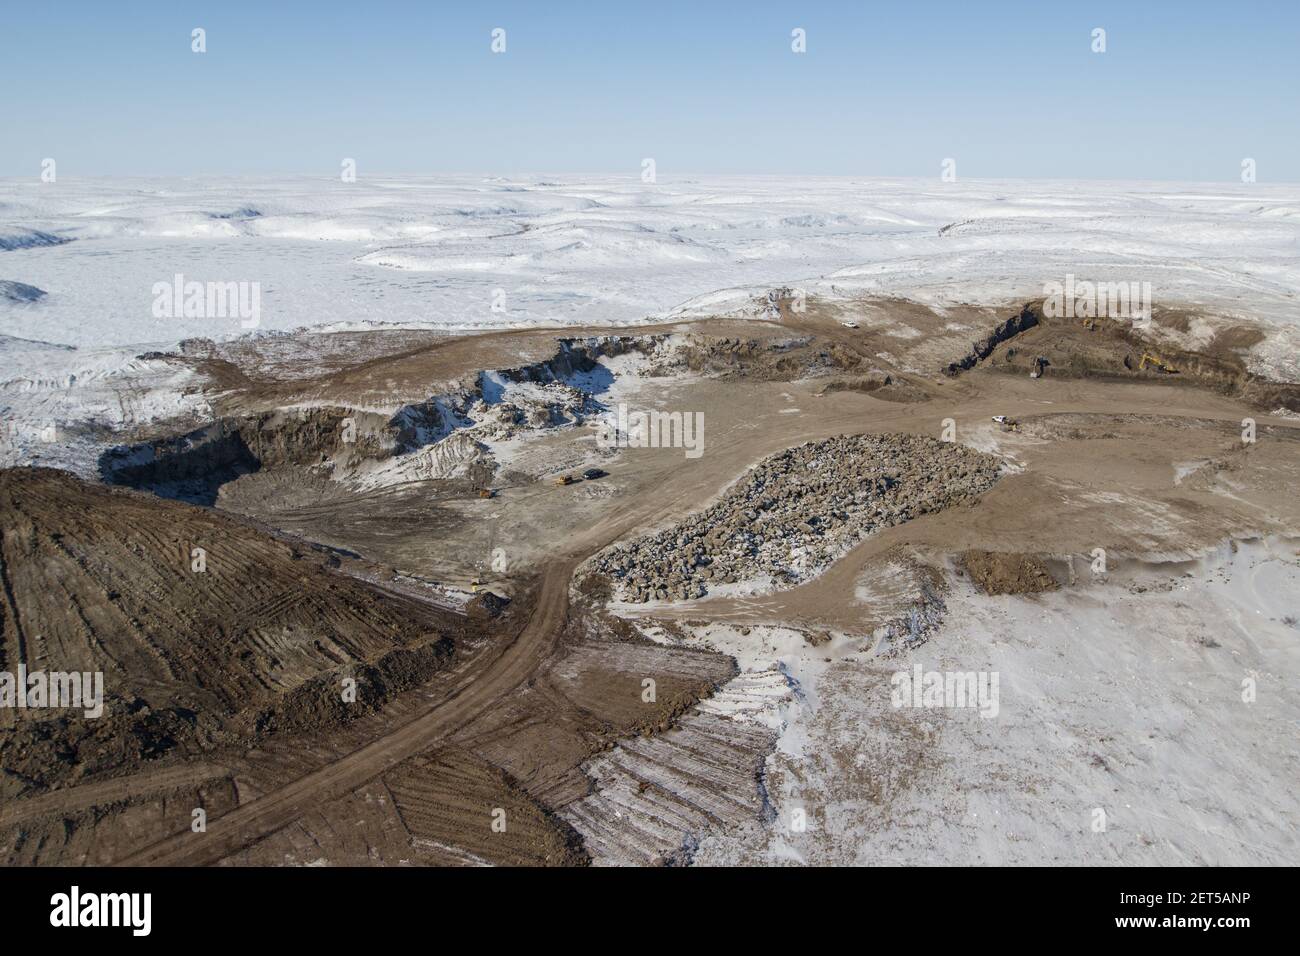 Aerial view of one of the gravel pits used to build the Inuvik-Tuktoyaktuk Highway, Northwest Territories, Canada's Arctic. (April 2014) Stock Photo